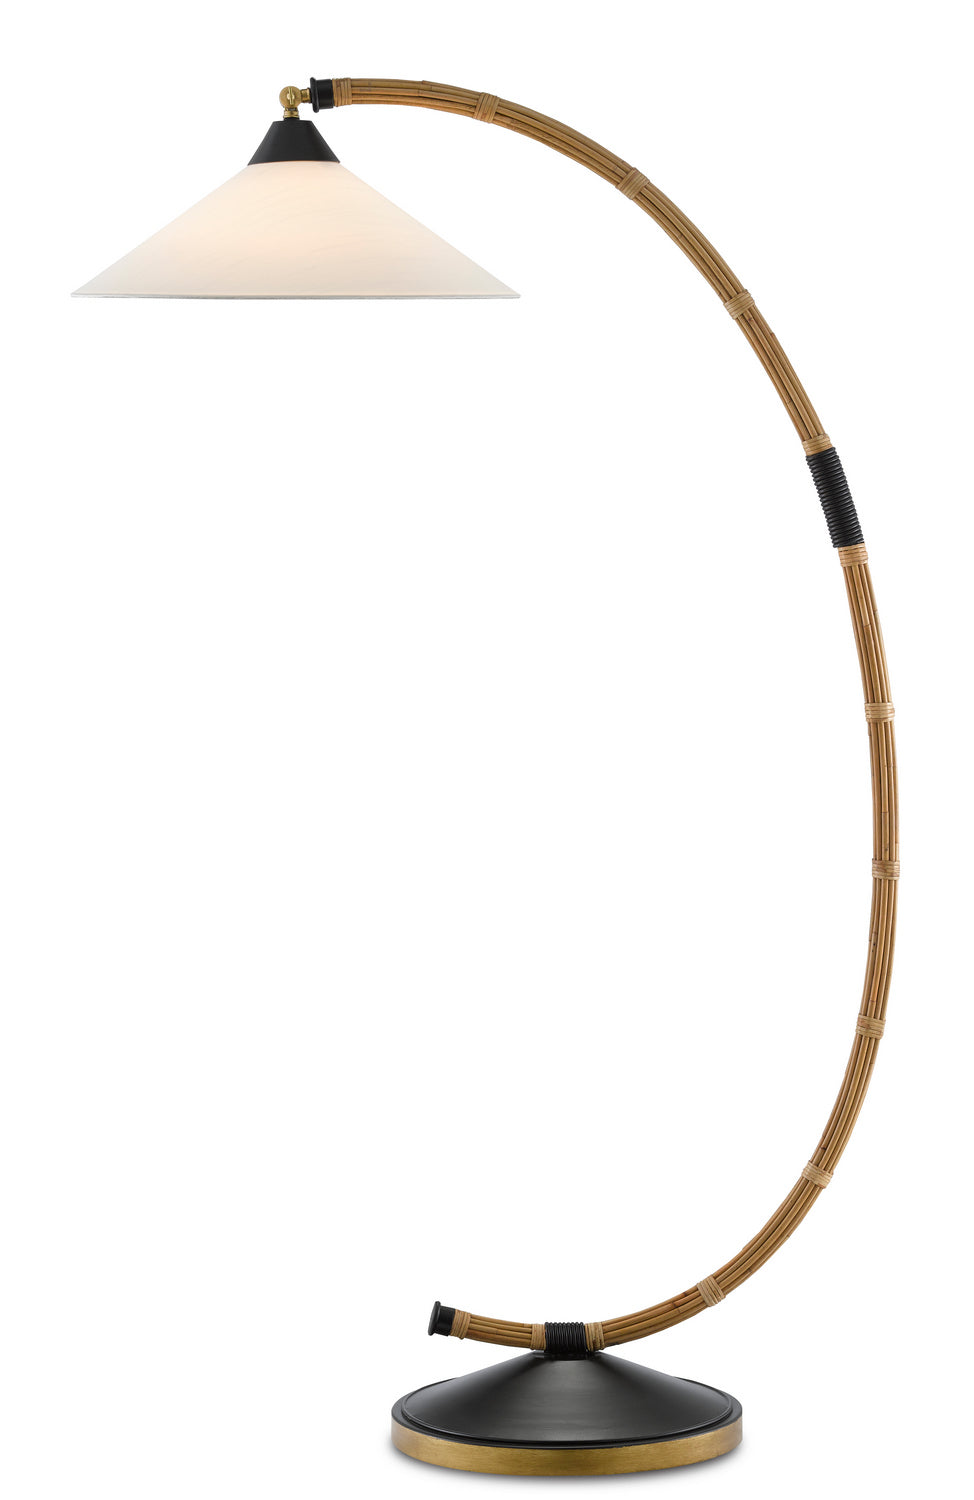 One Light Floor Lamp from the Lisbon collection in Natural/Rattan/New Brass/Satin Black finish